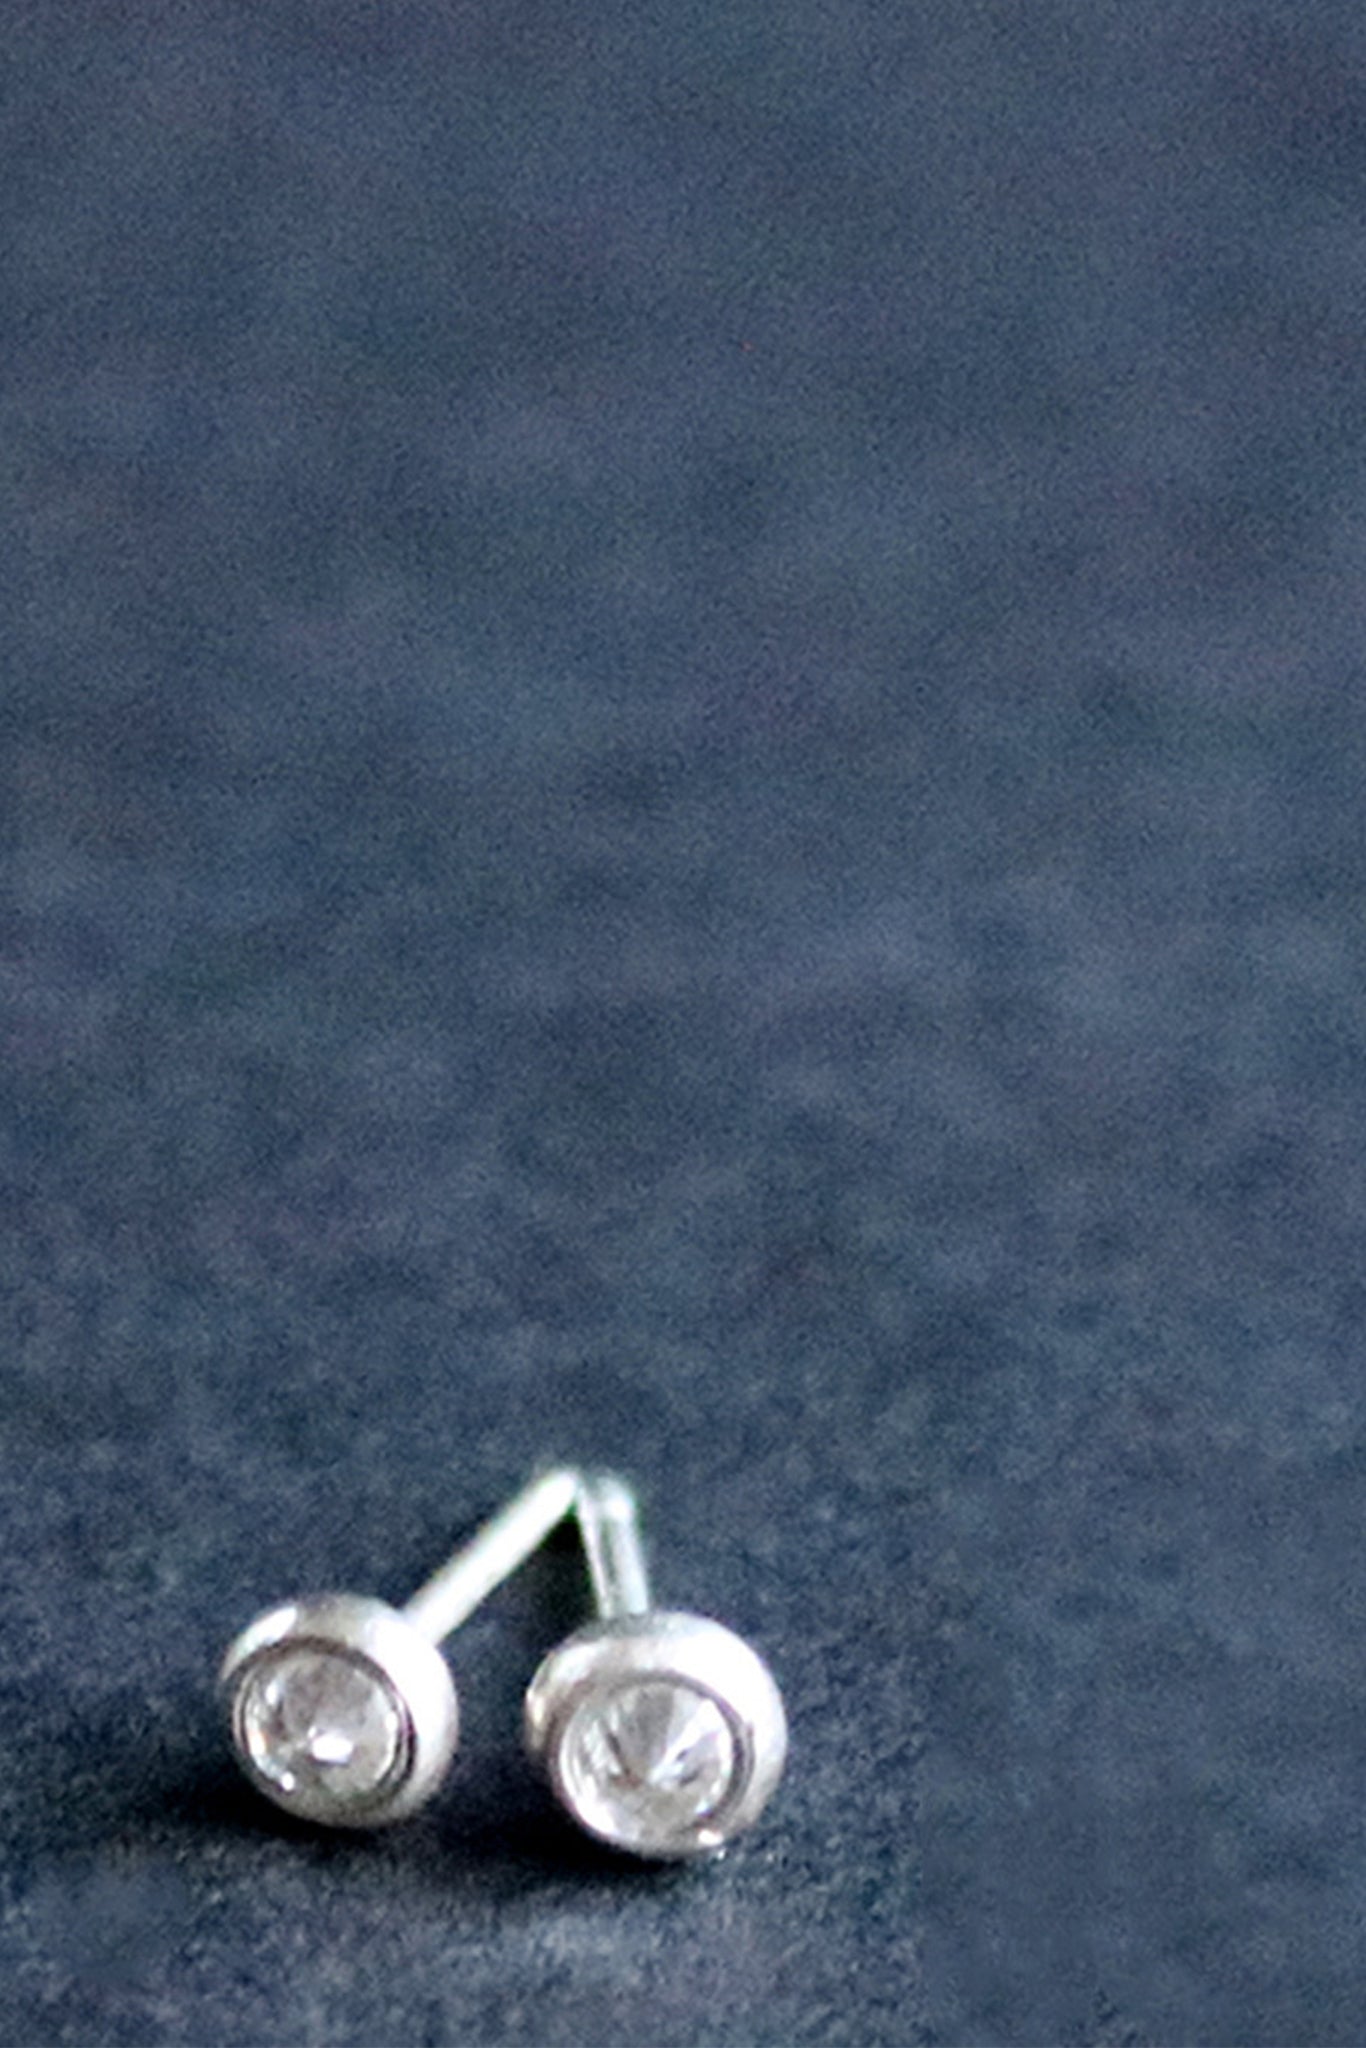 Inverted white Diamond Studs | Polished Silver